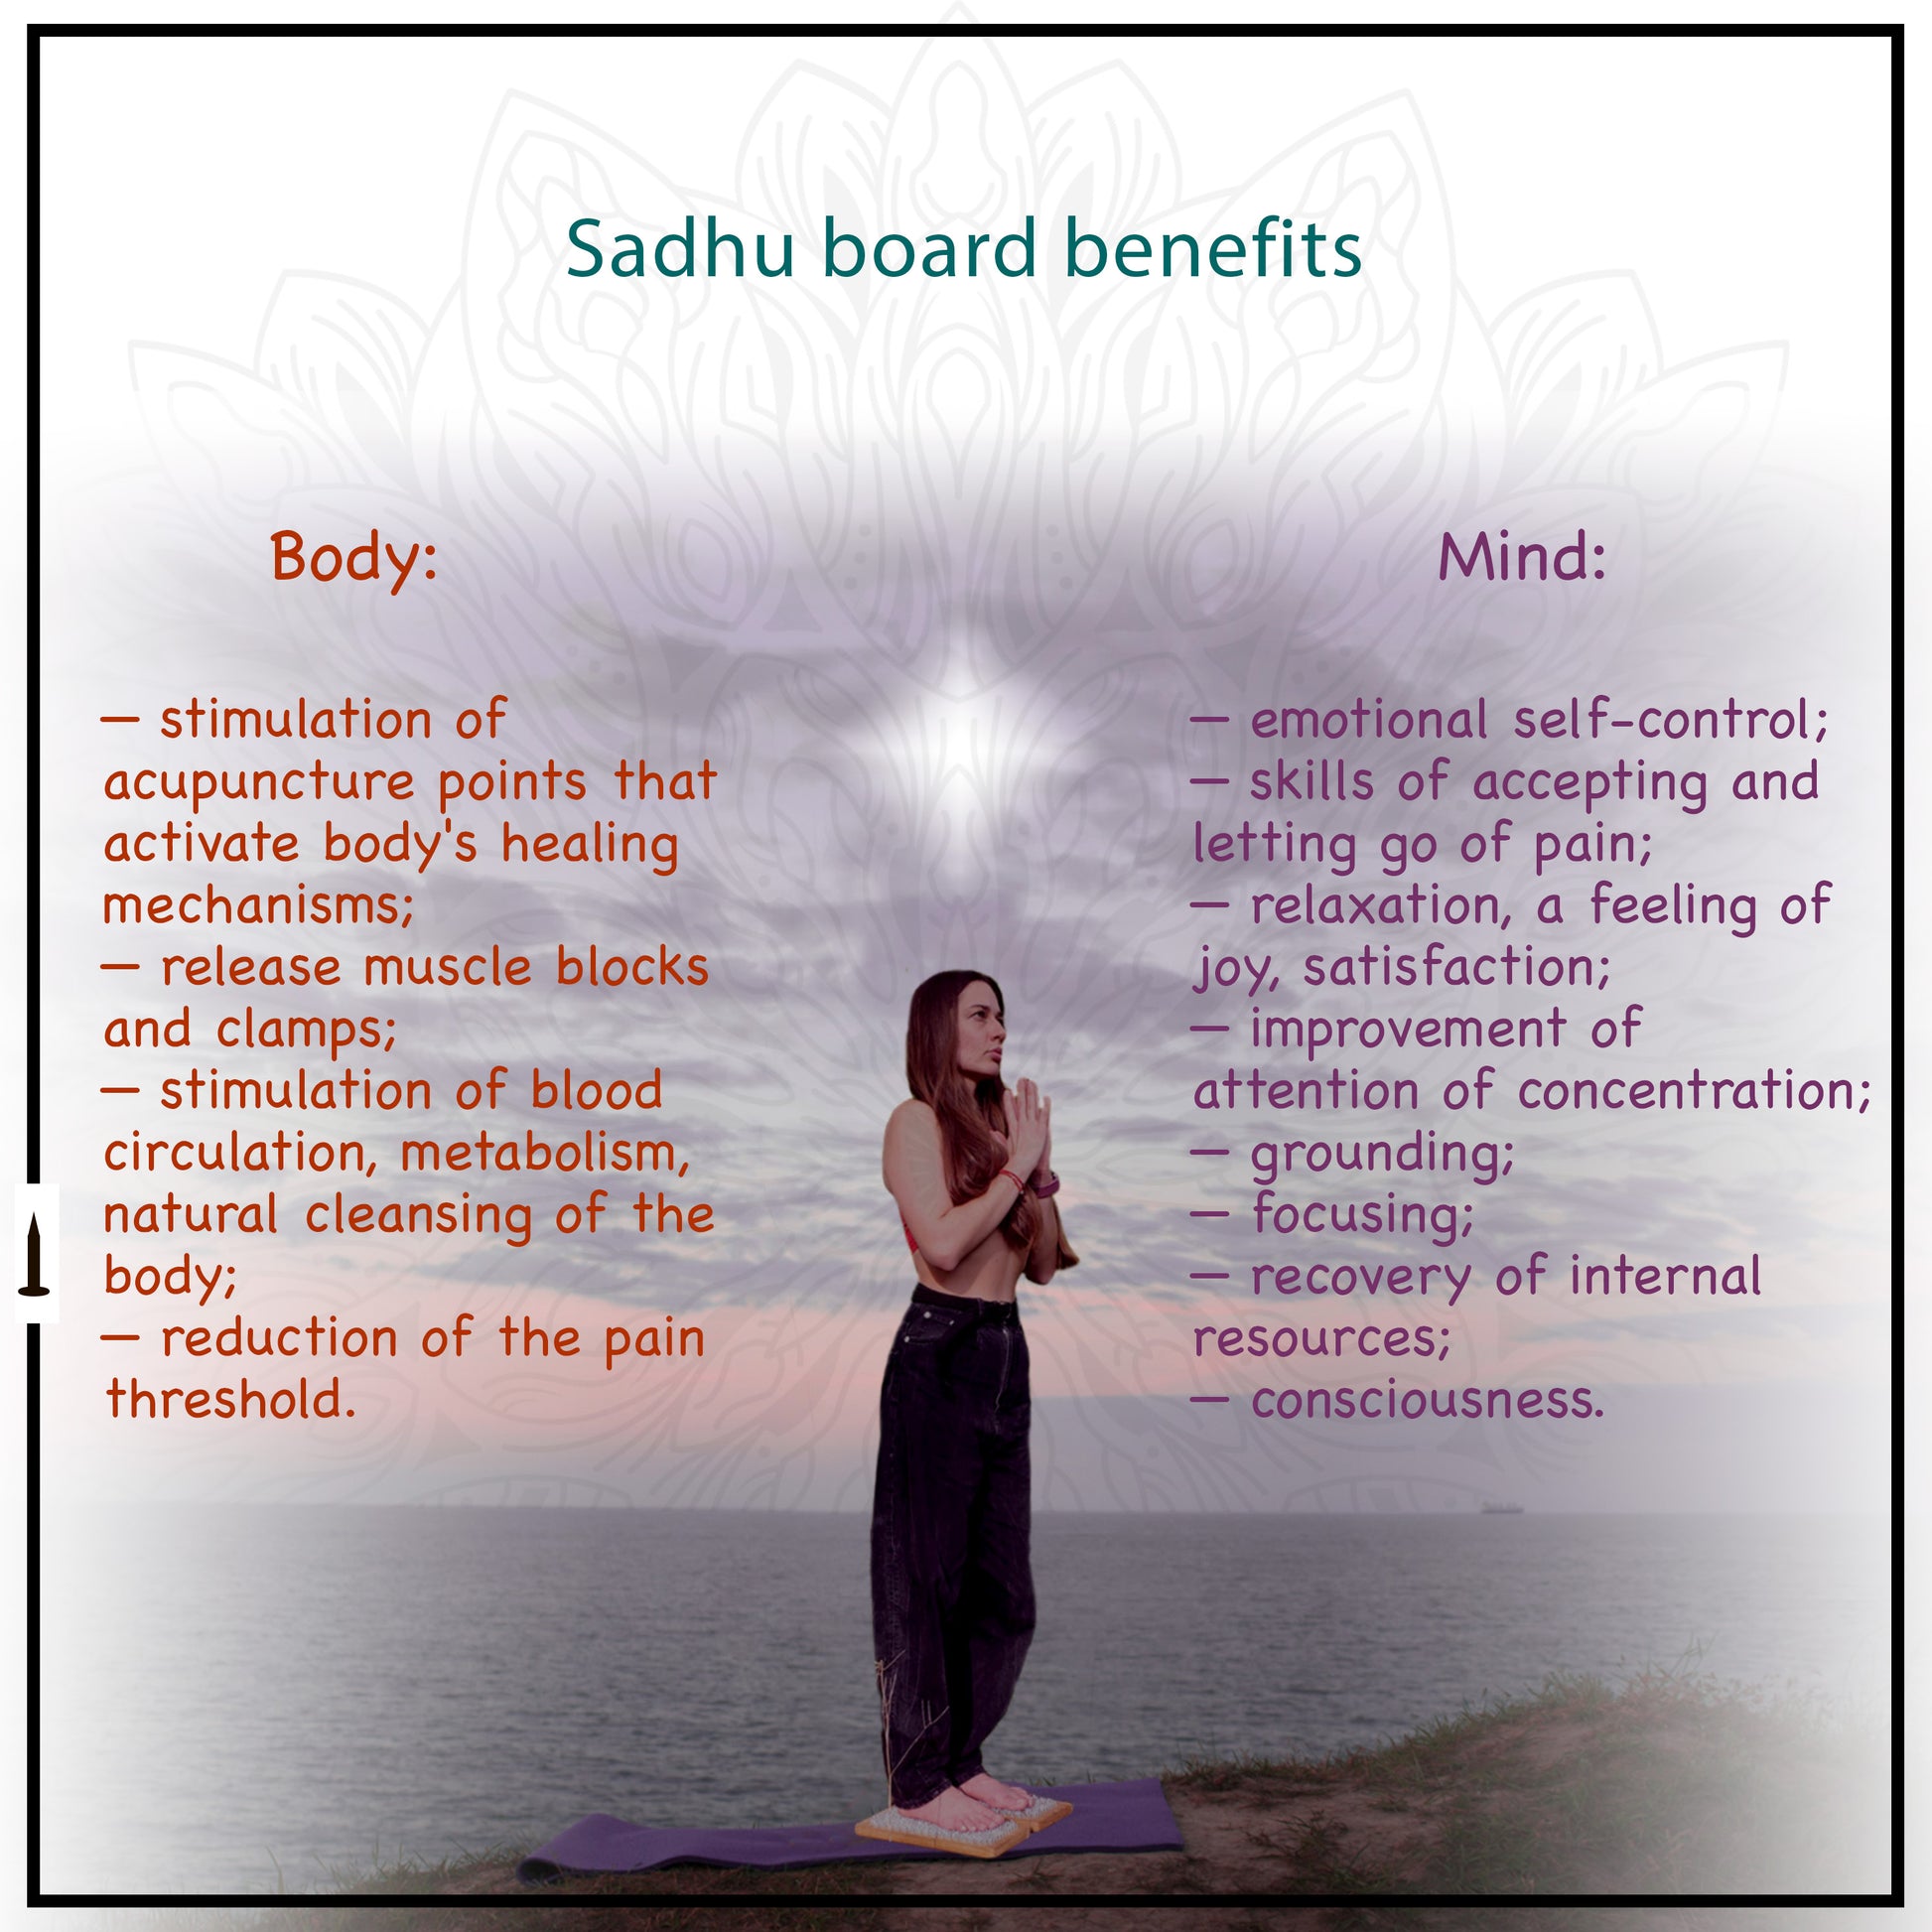 Sadhu board benefits for body and mind